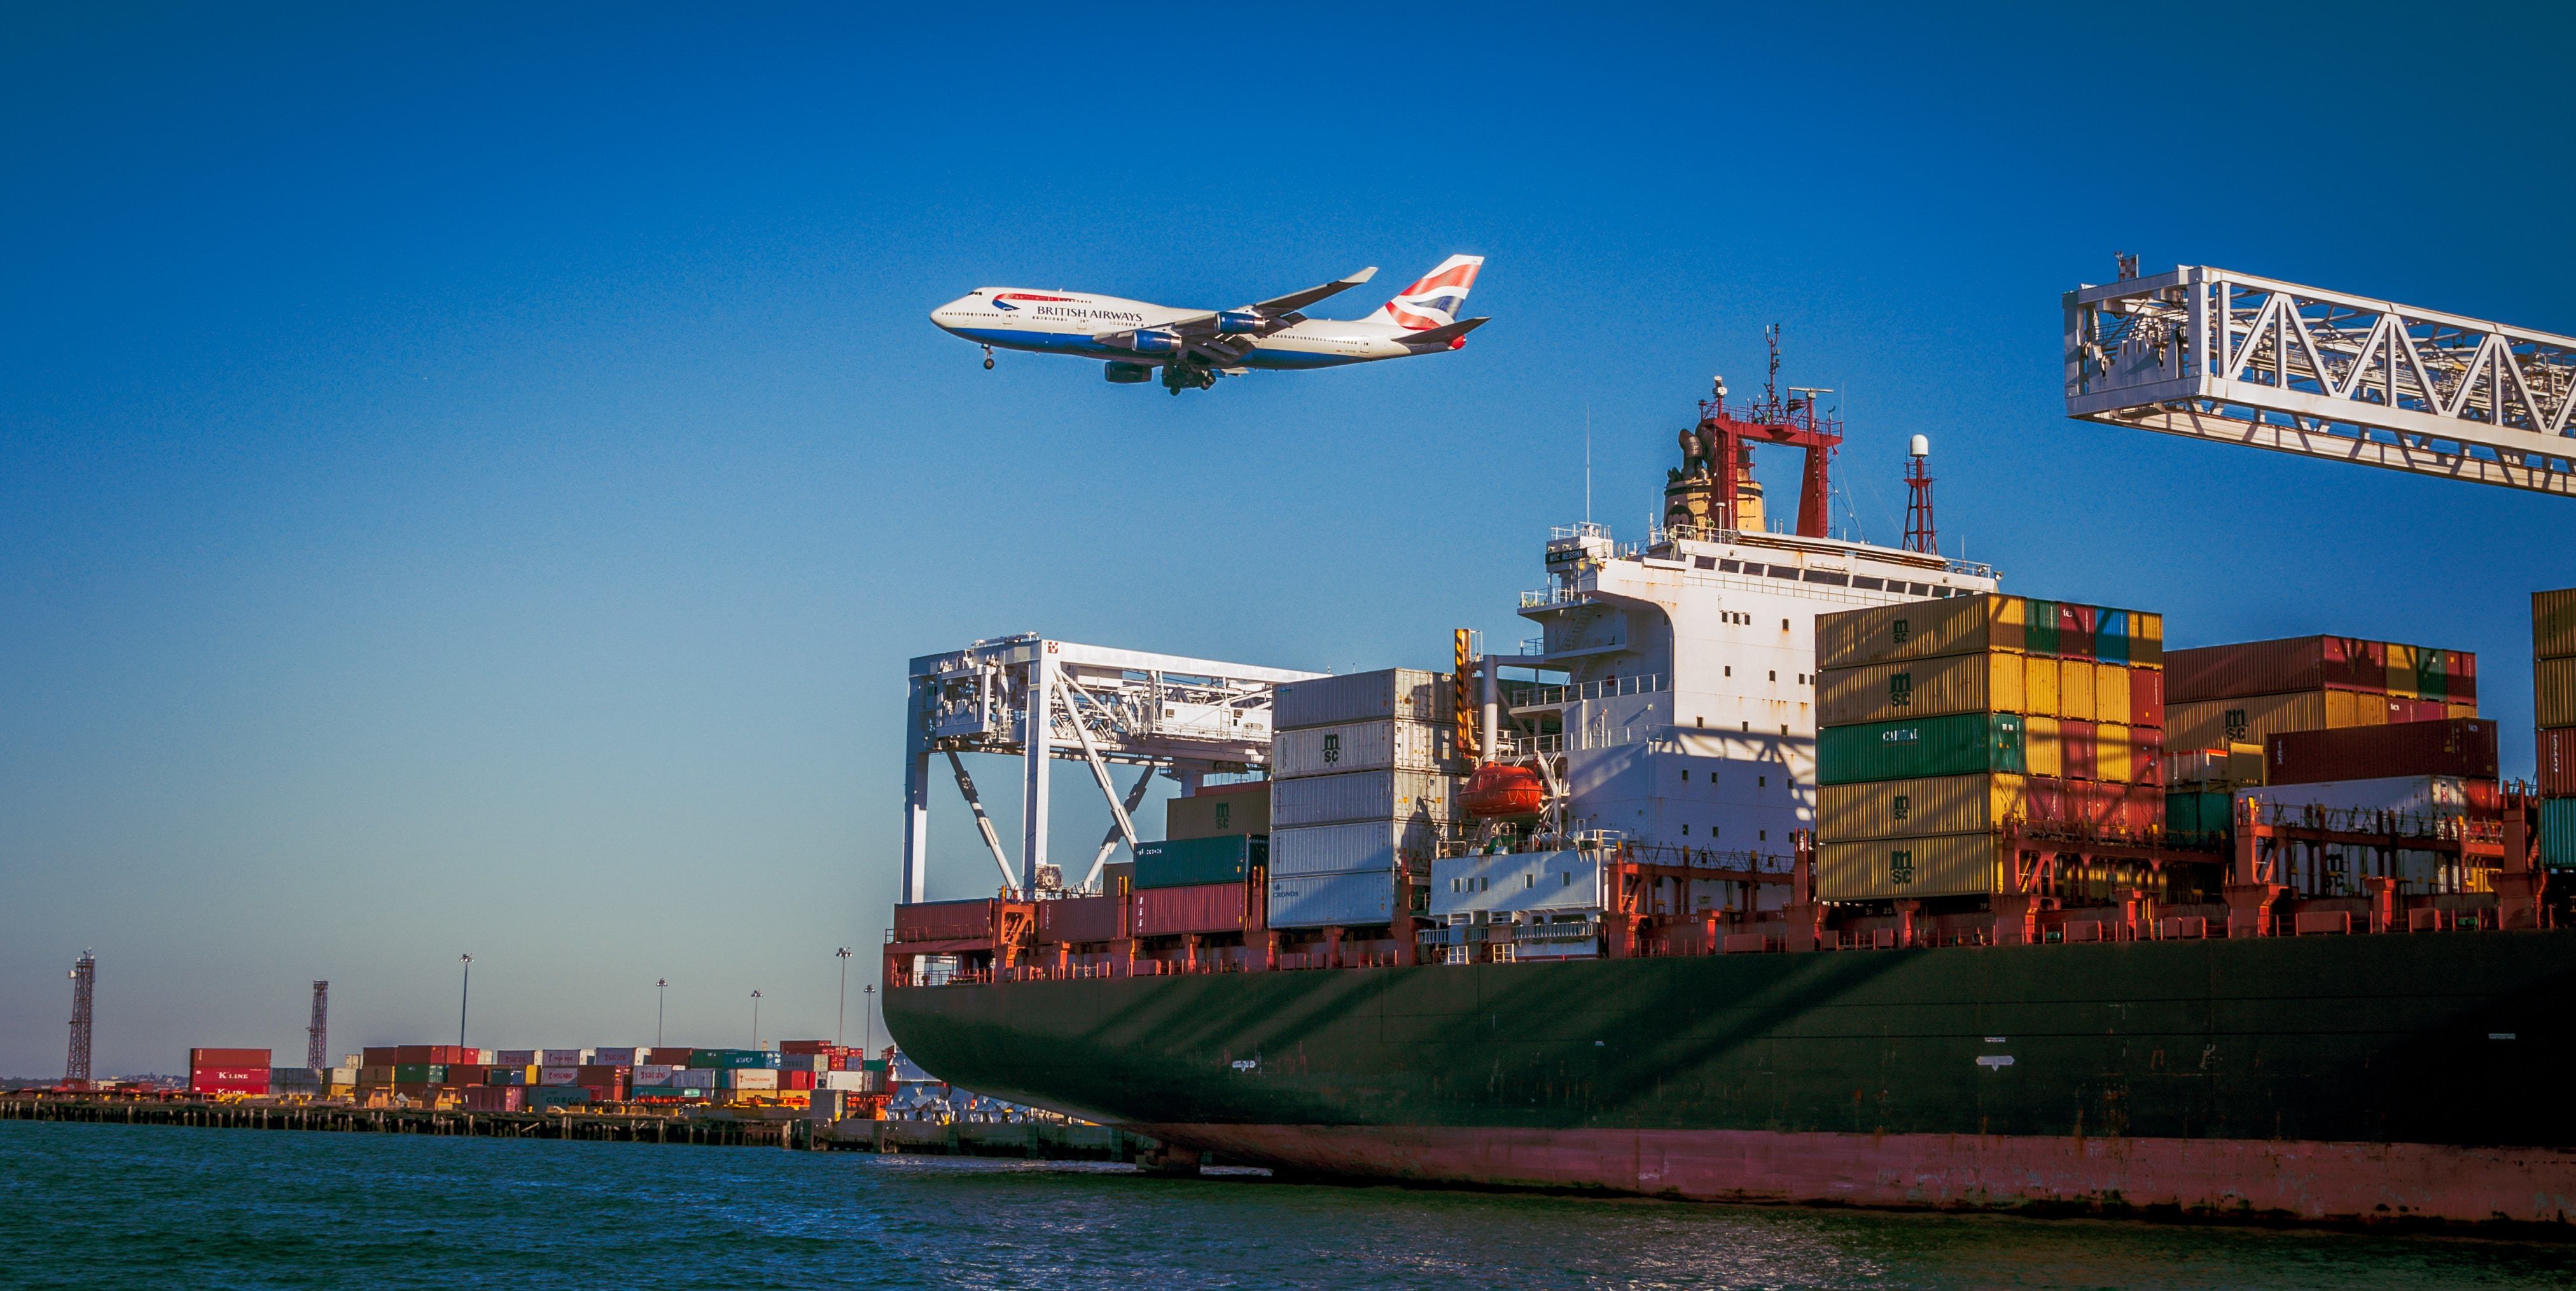 Cargo ship with containers, plane flying in the background